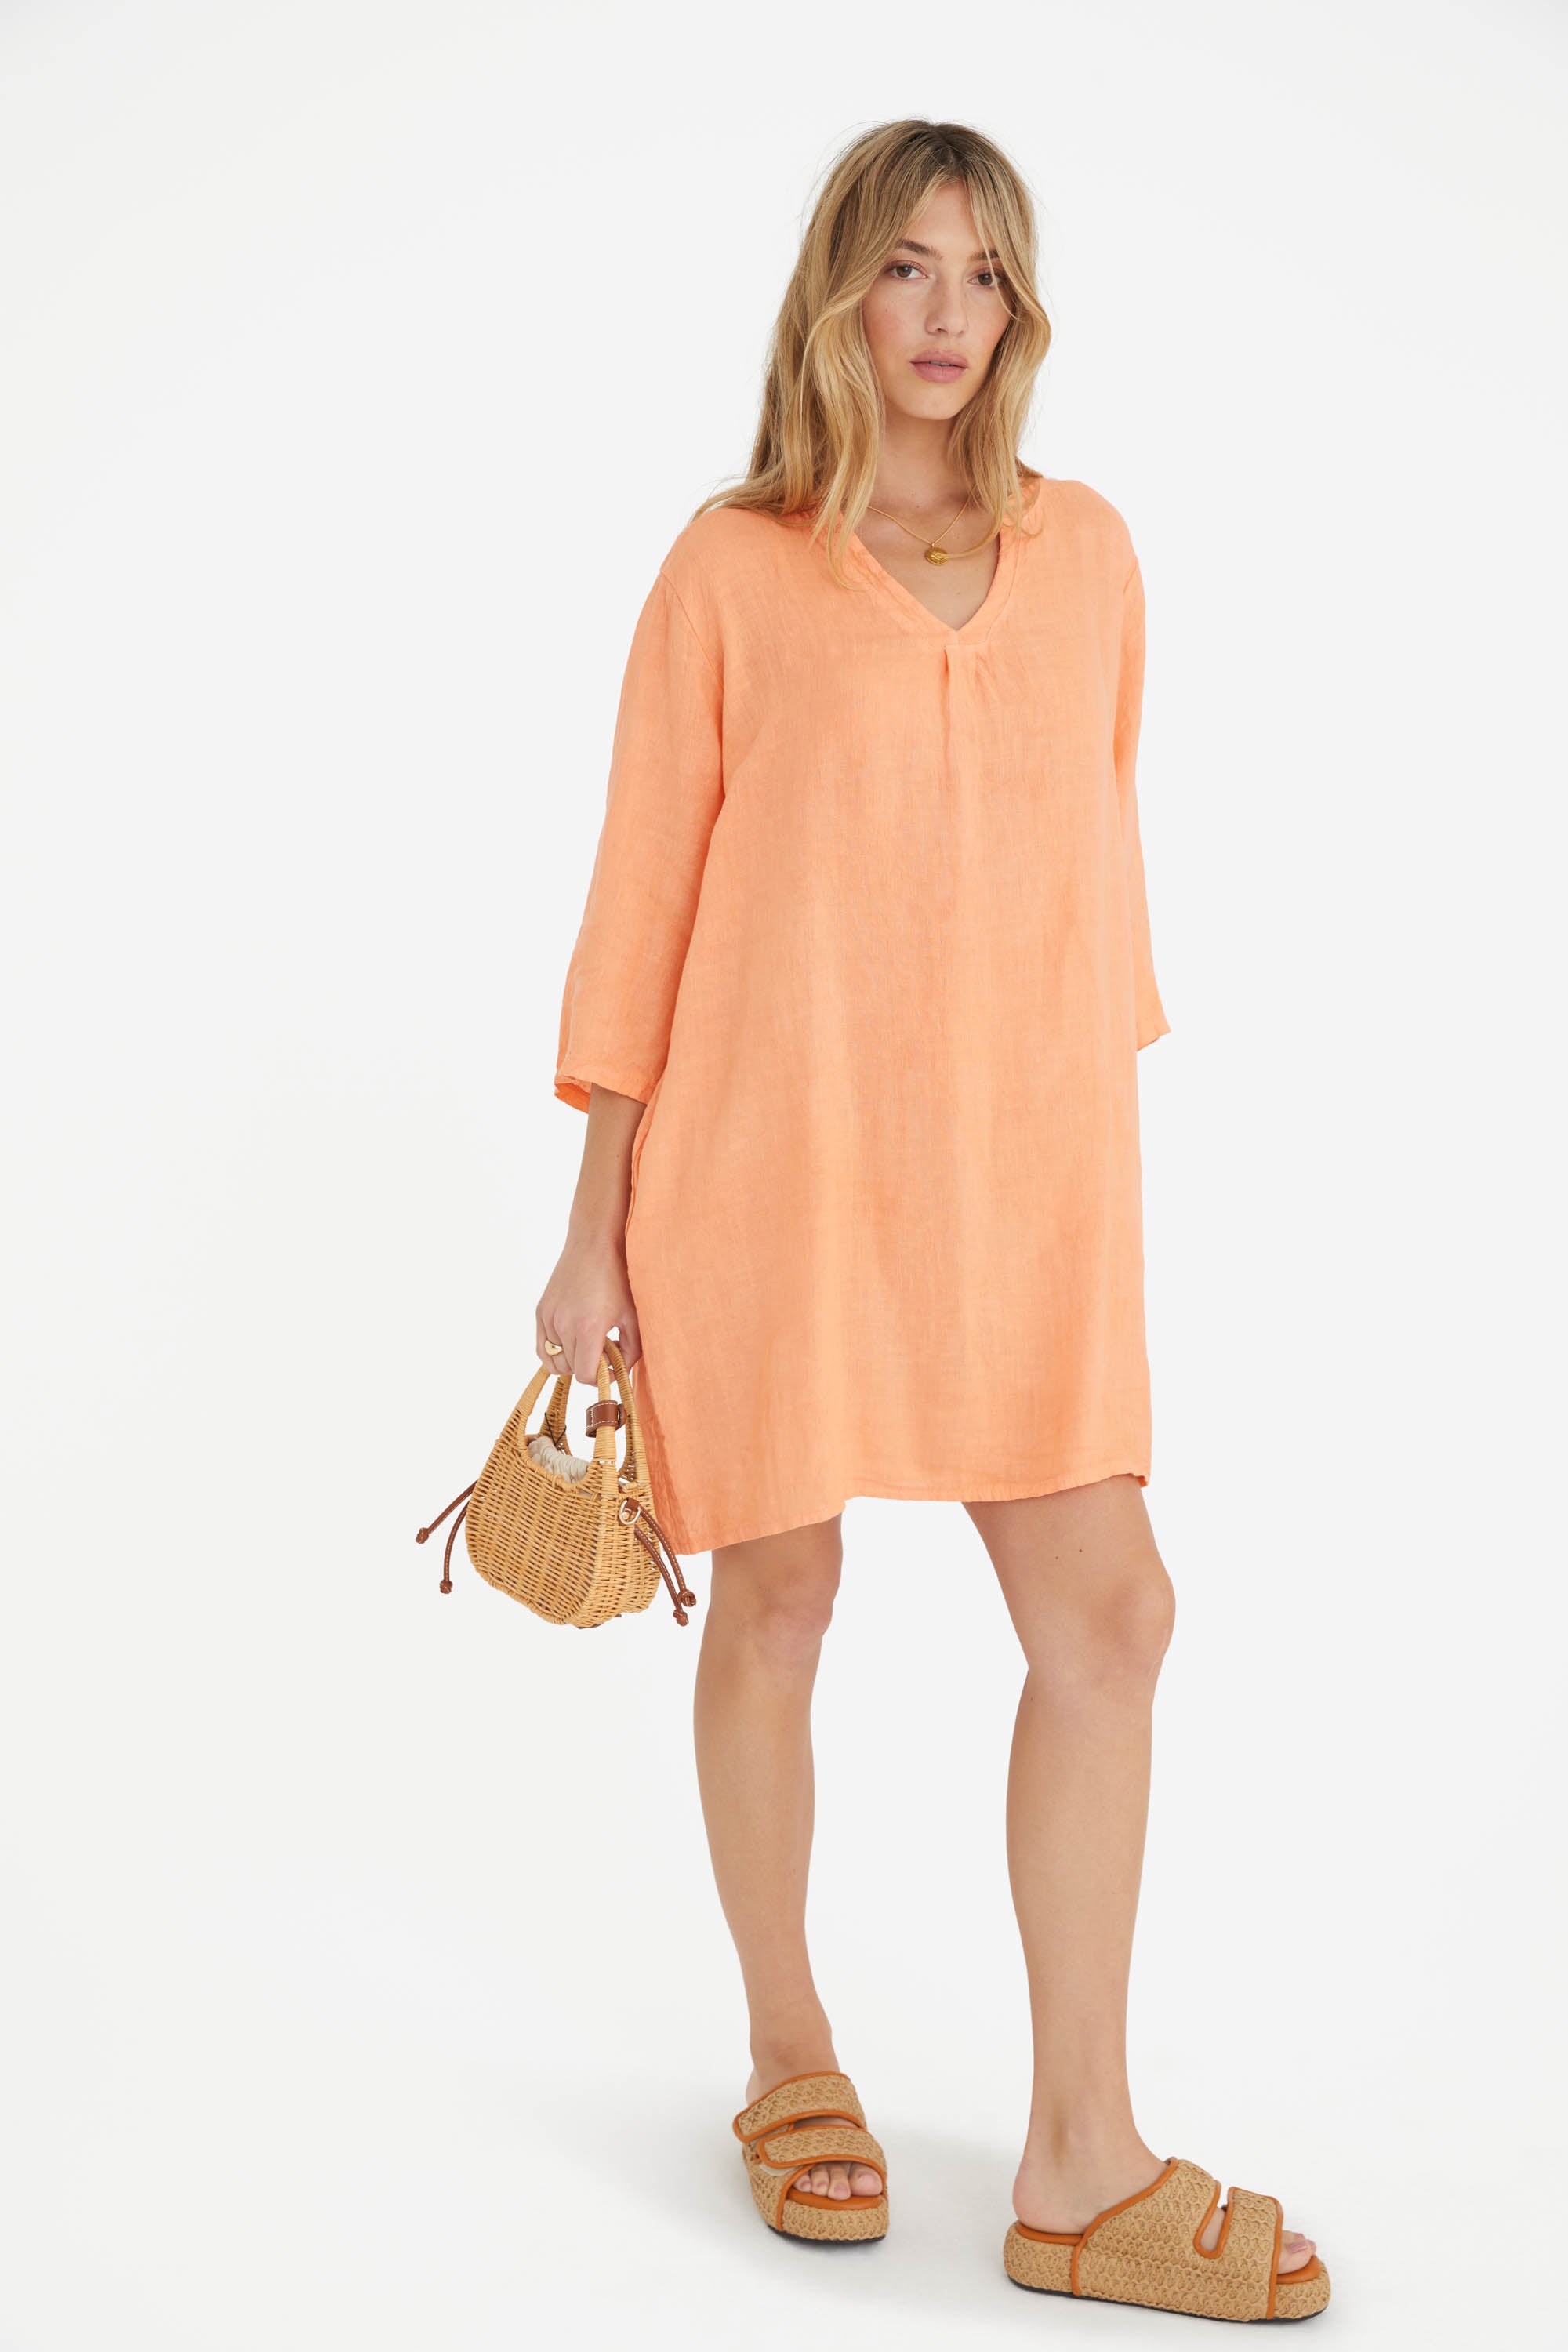 The Katy Linen Dress in Coral